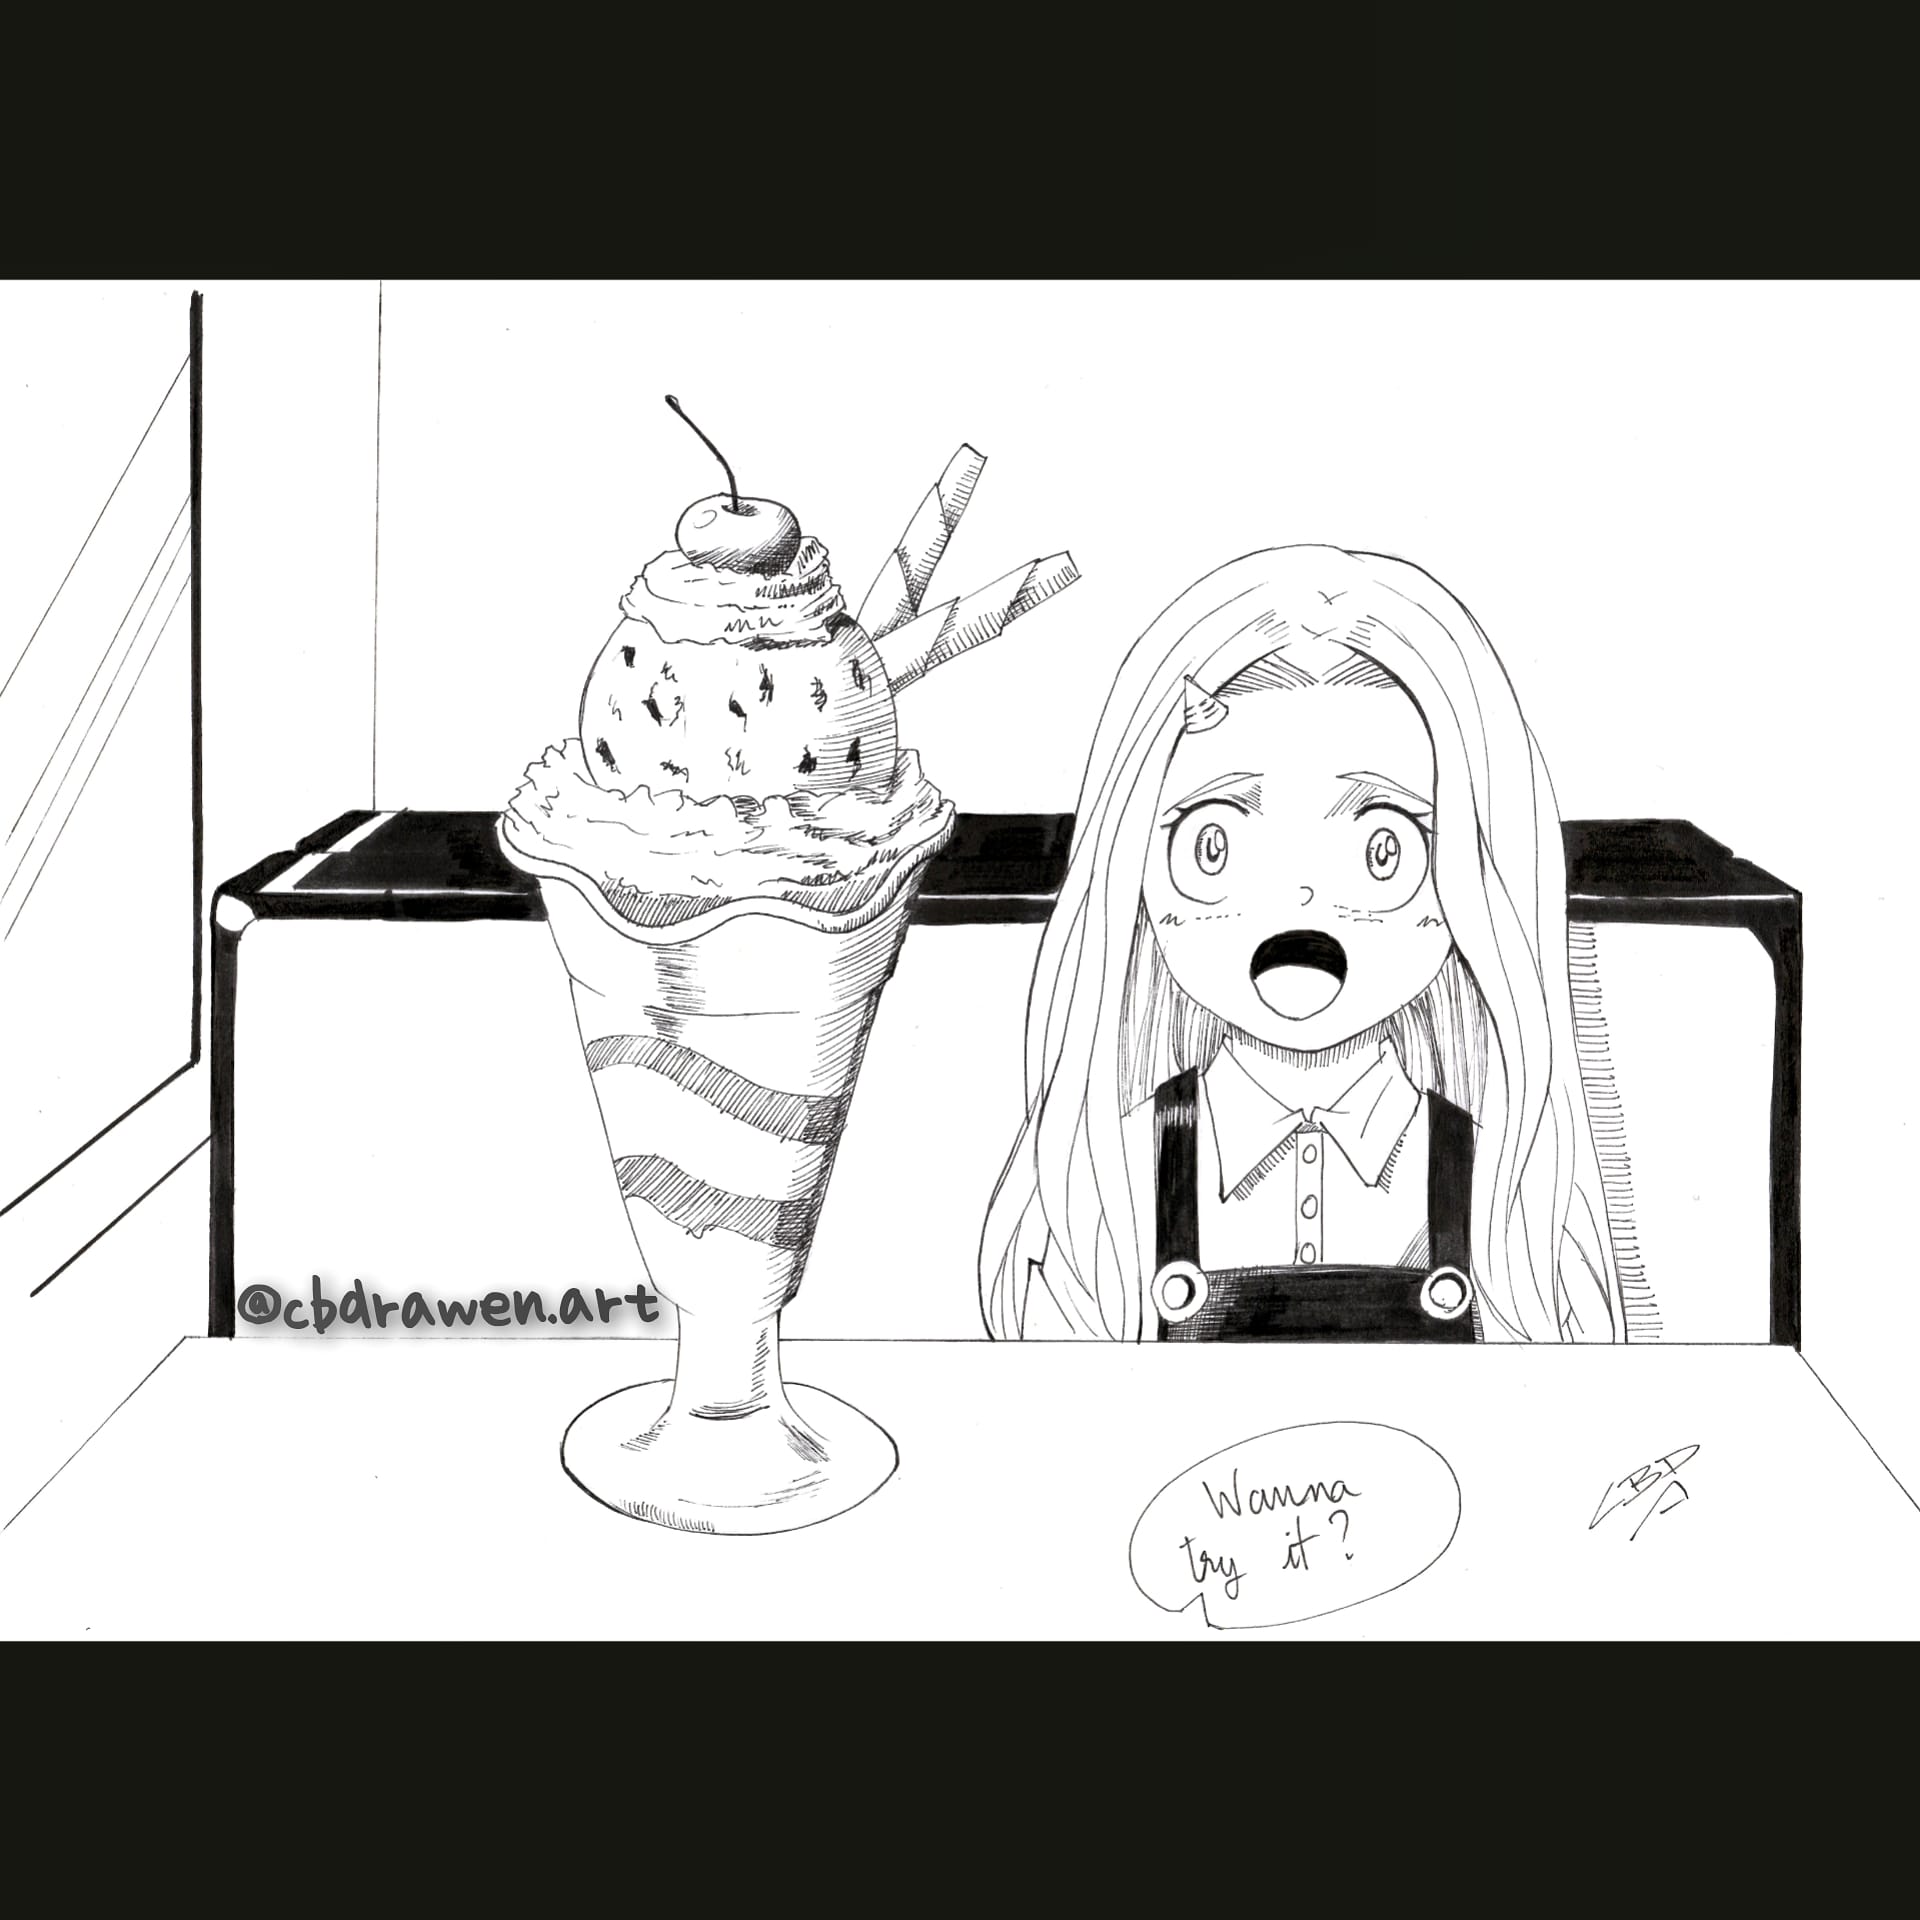 CBDRAWEN Commissions open on X: "Eri eating ice cream for the first time!  @myheroacademia #art #sketch #mangaart #animeart #anime #manga #drawing  #blackandwhite #myheroacademia #bokunoheroacademia #eri  https://t.co/rXKNO9bAp6" / X